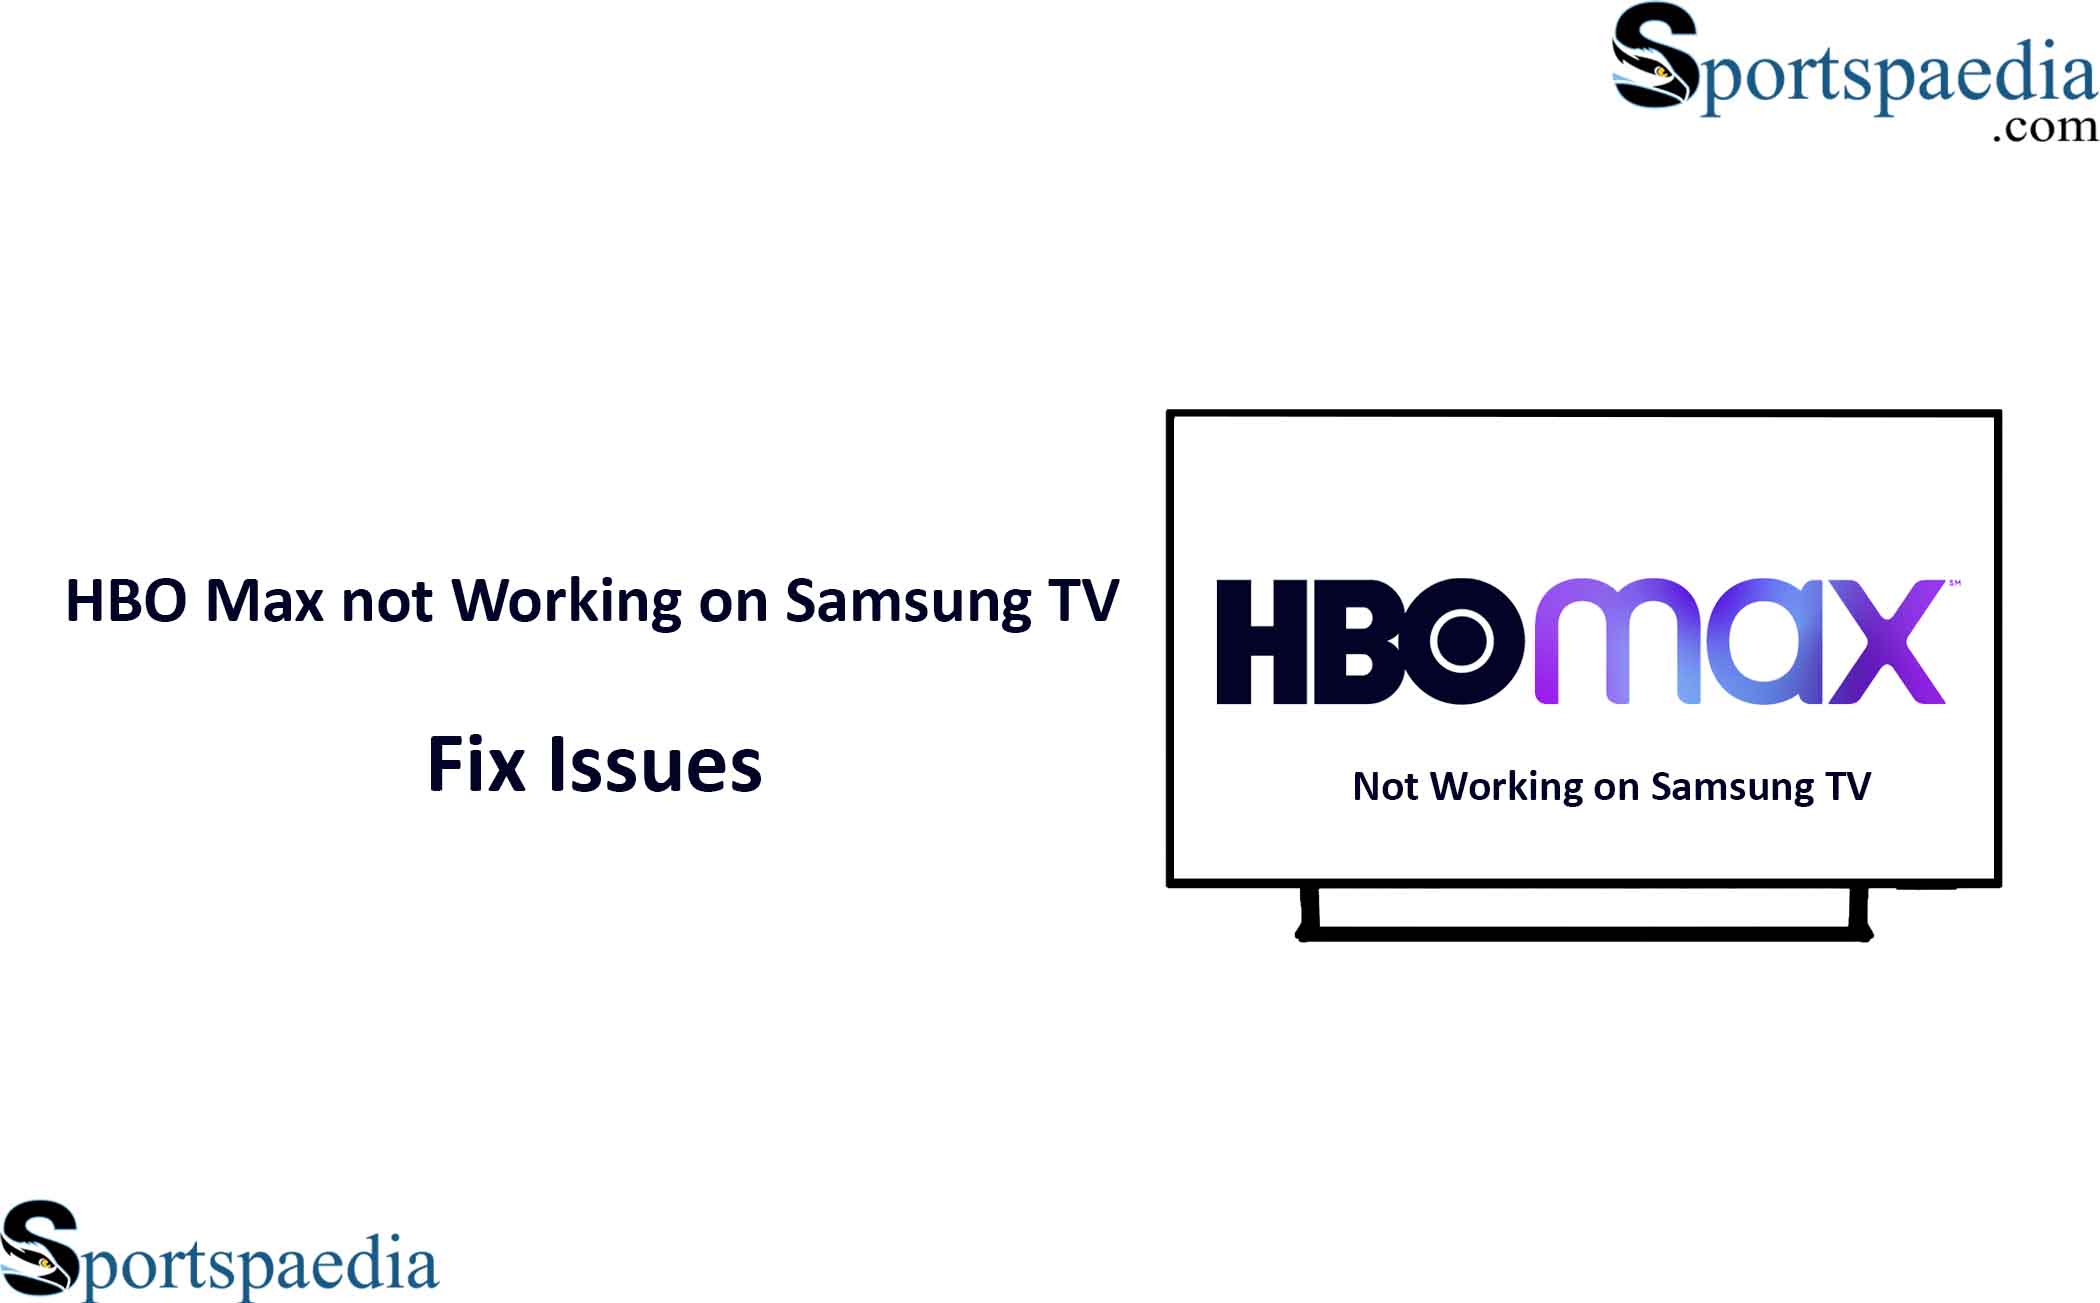 HBO Max not Working on Samsung TV - Fix Issues